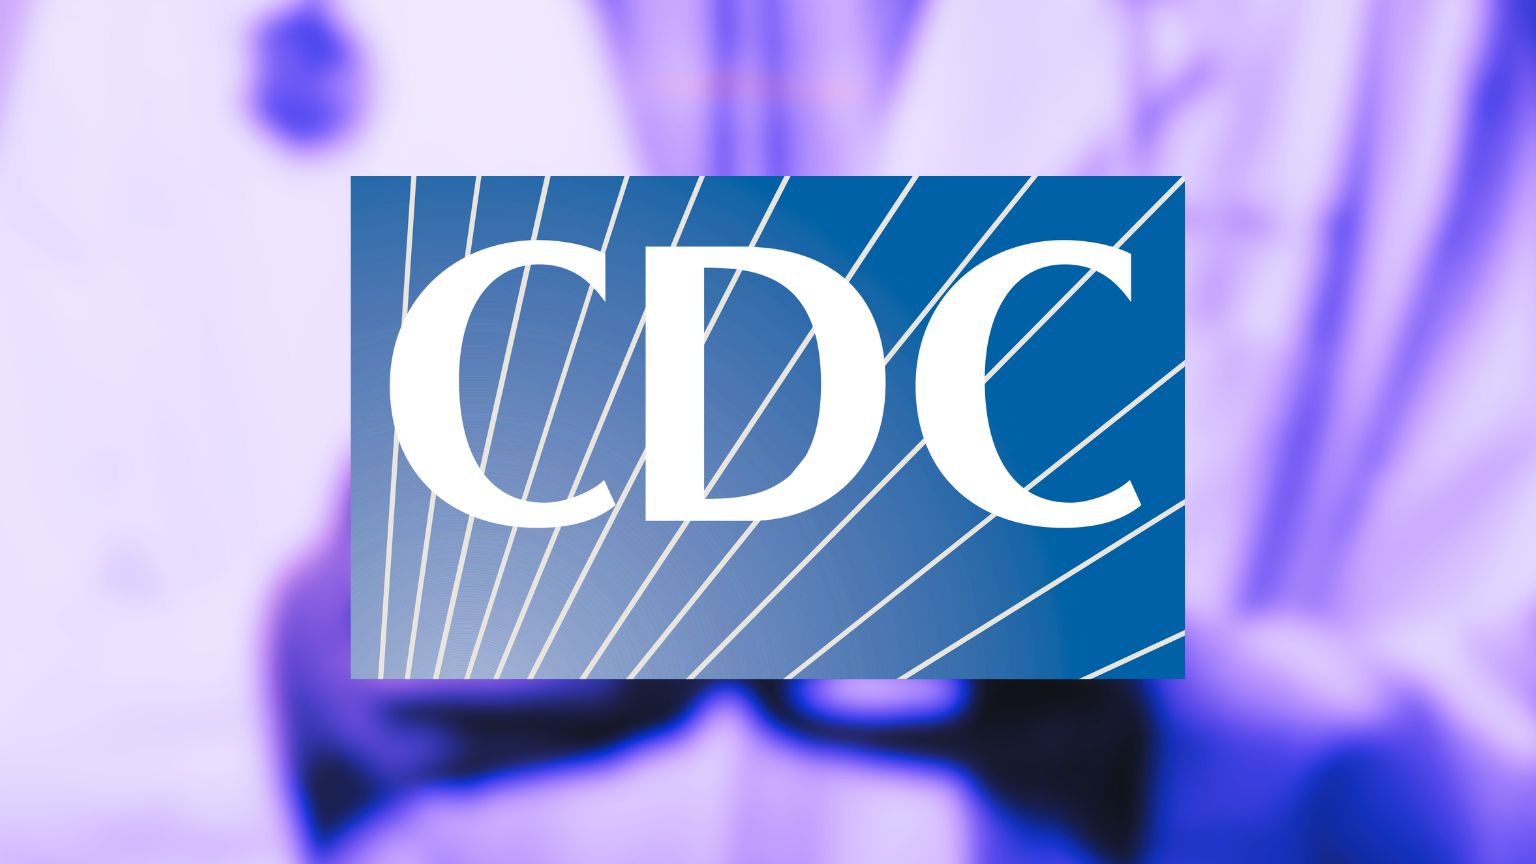 CDC “behavior change” project targeted vaccine critics, was funded by Pfizer and New York “Misinformation Response Unit”